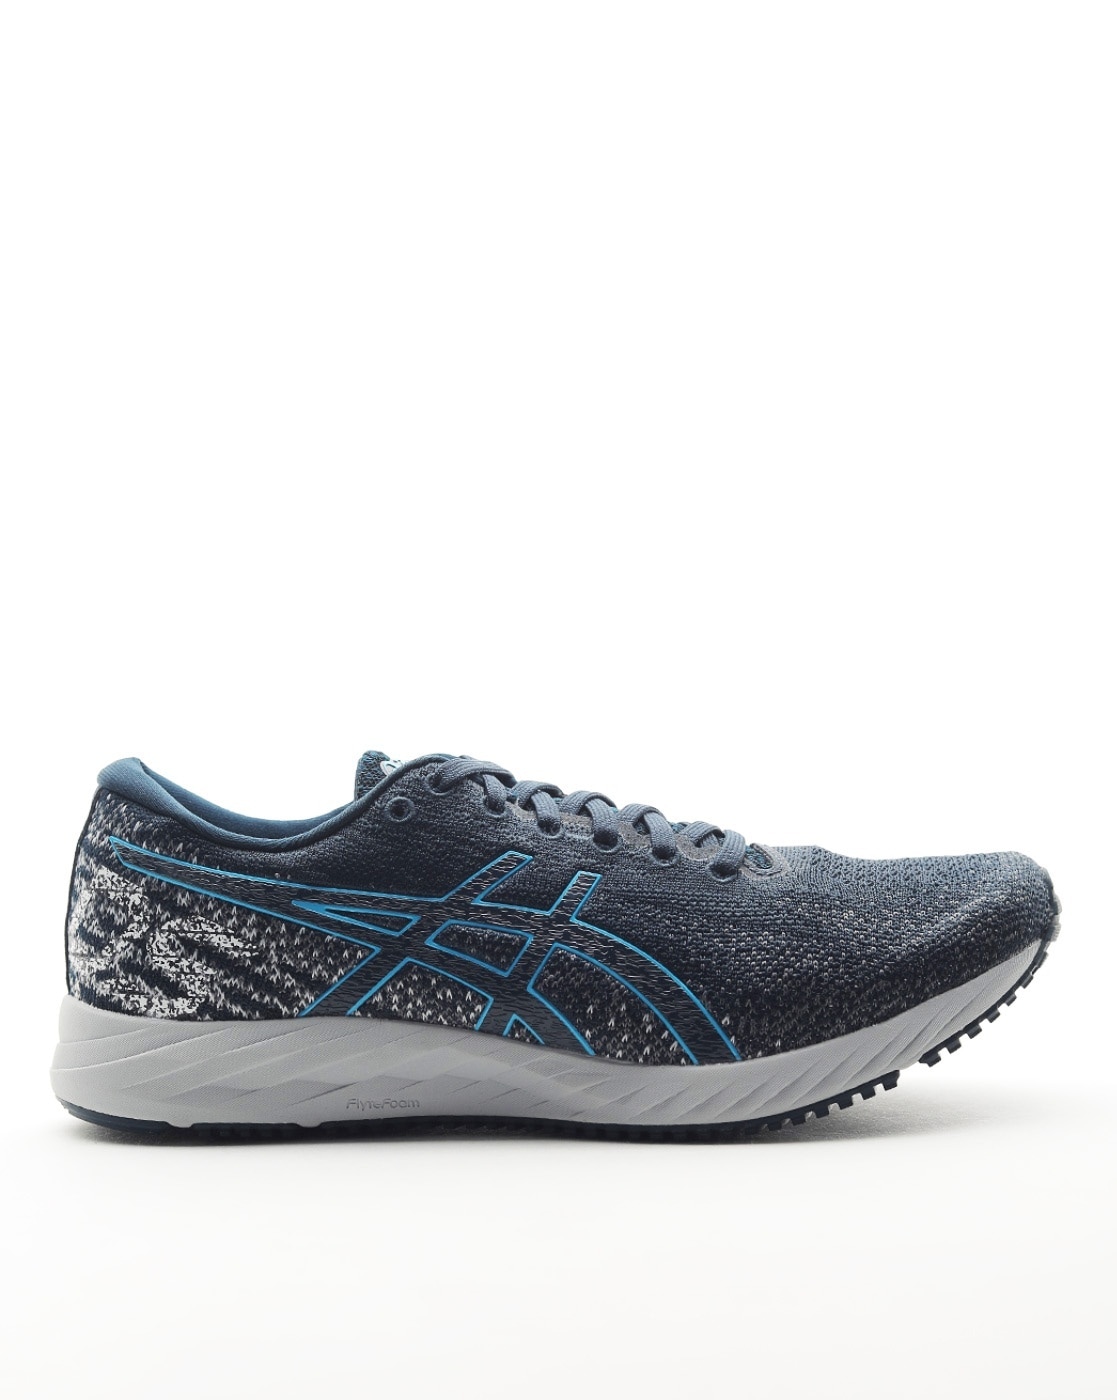 Buy Navy Blue Sports Shoes for Men by ASICS Online 